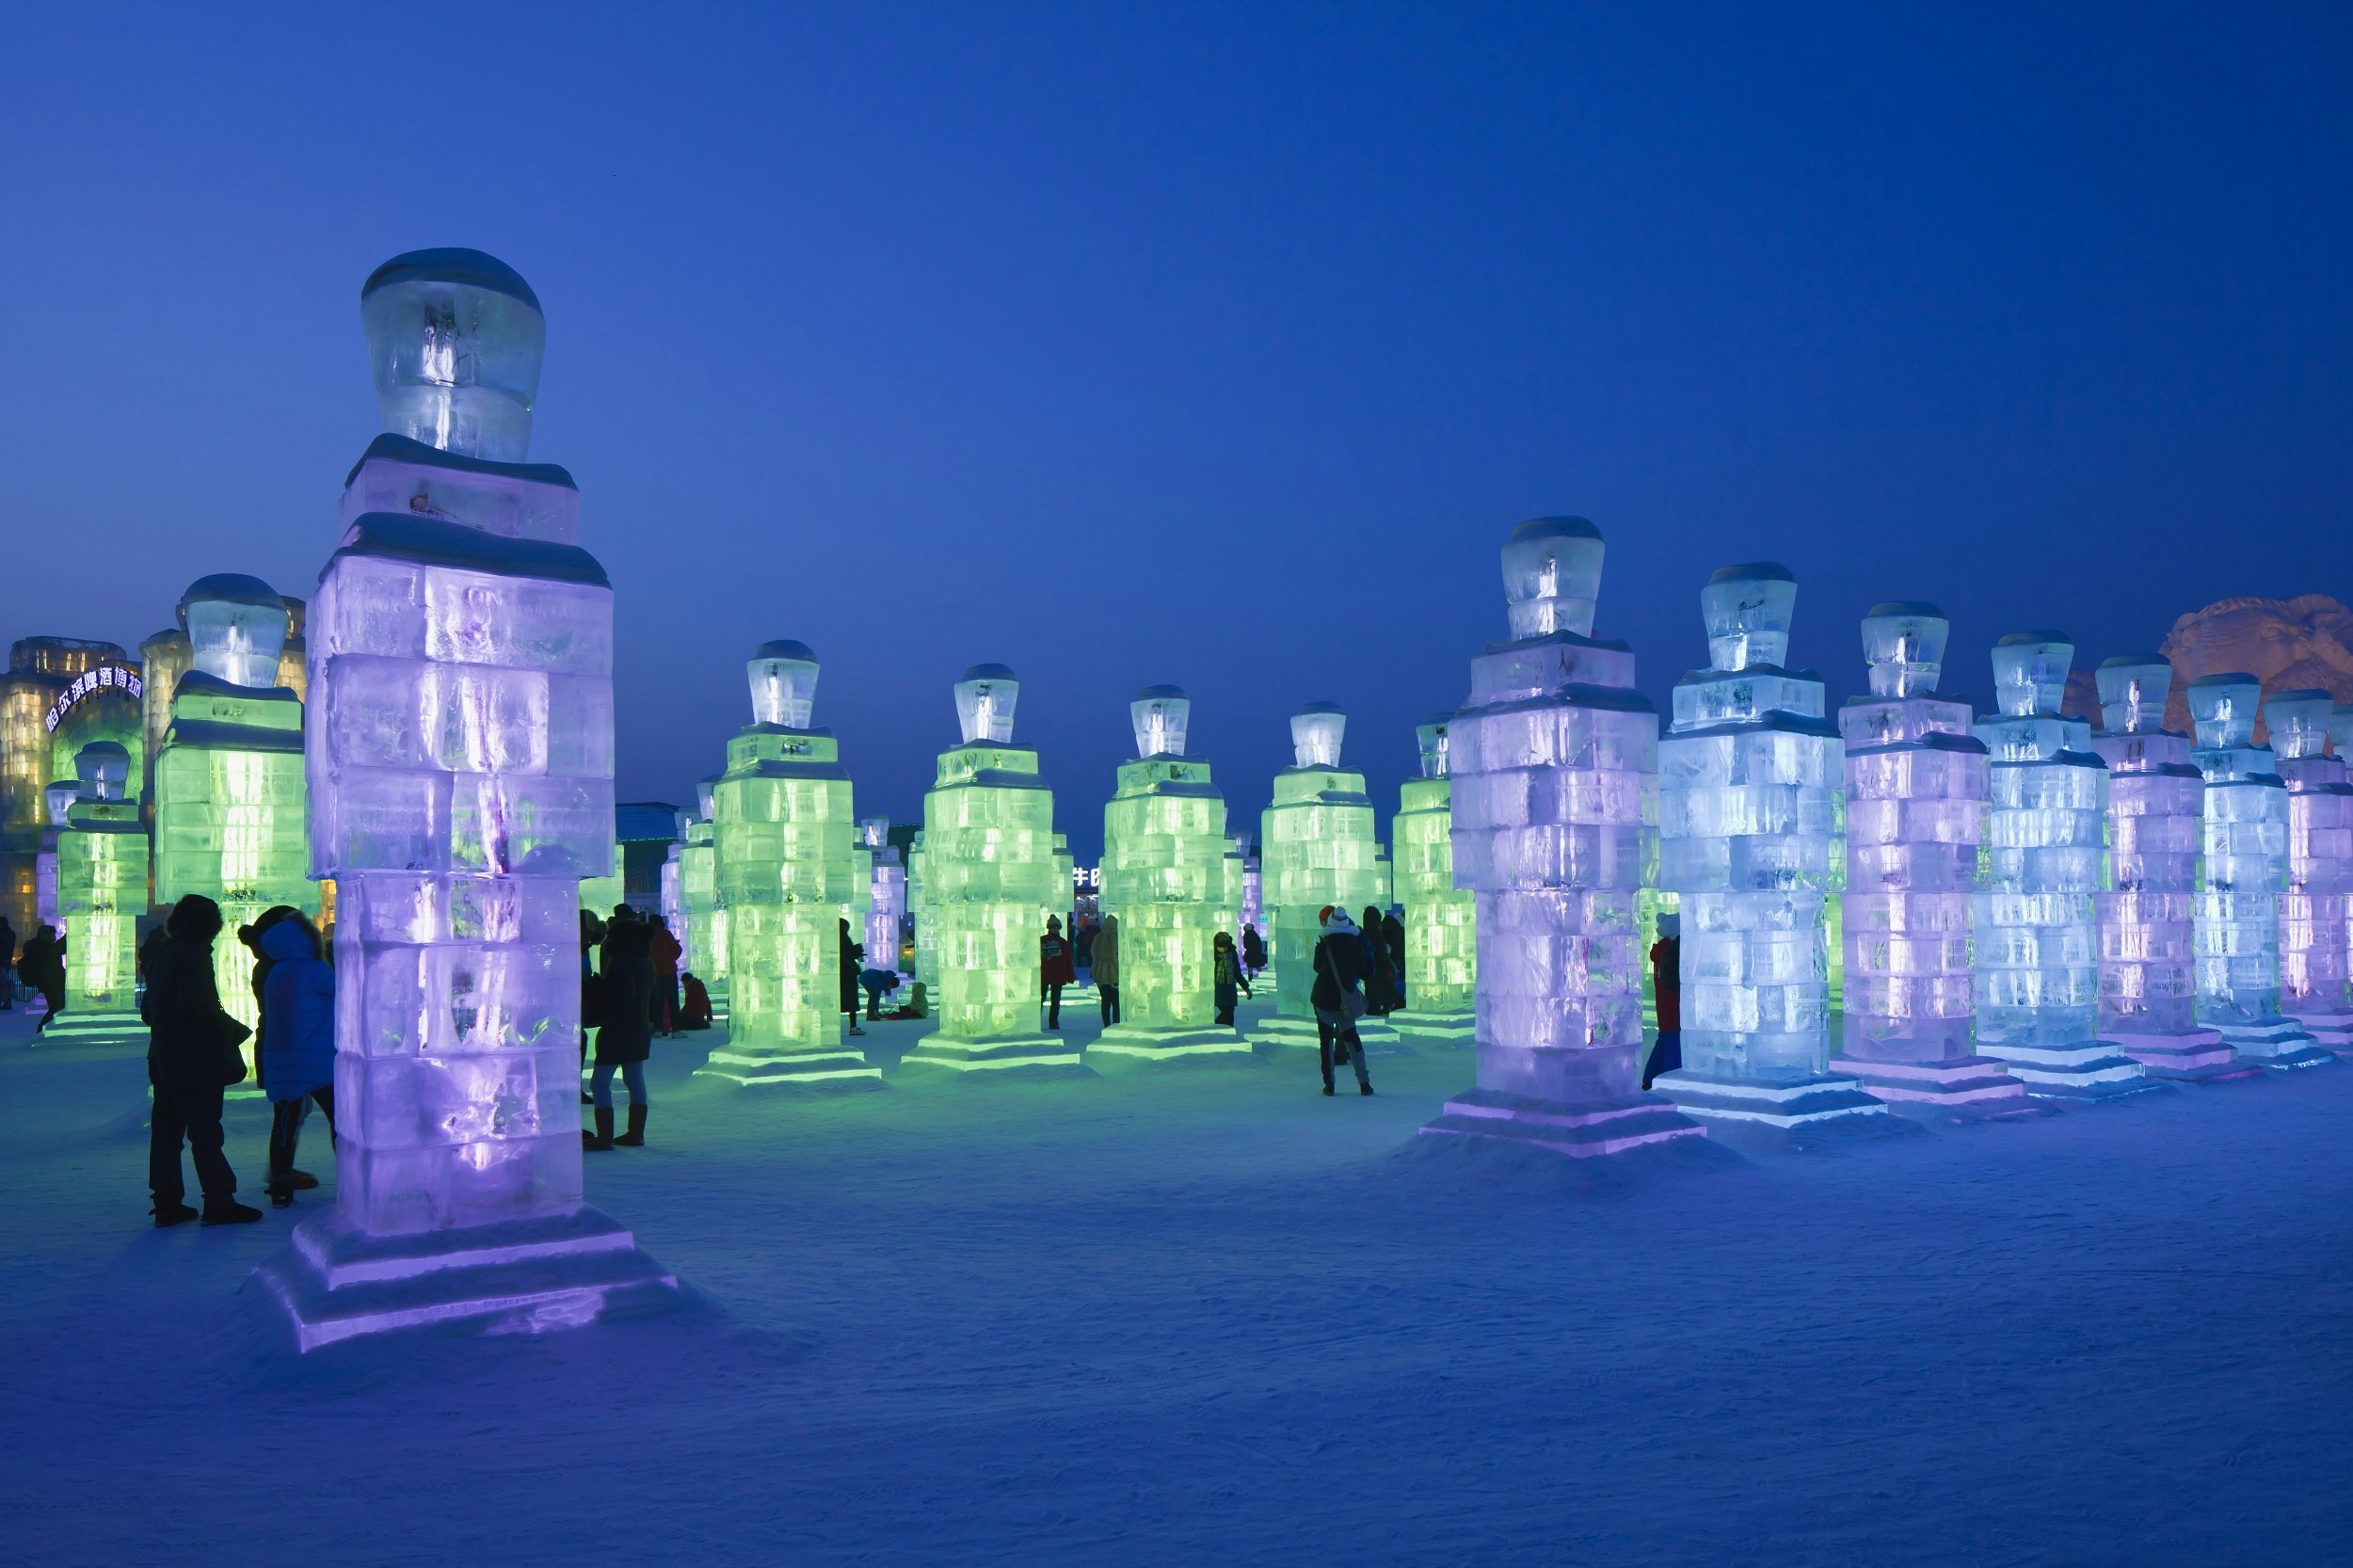 People chad in warm winter clothing mill around huge 6m-tall ice-block statues that are glowing purple, blue or green.